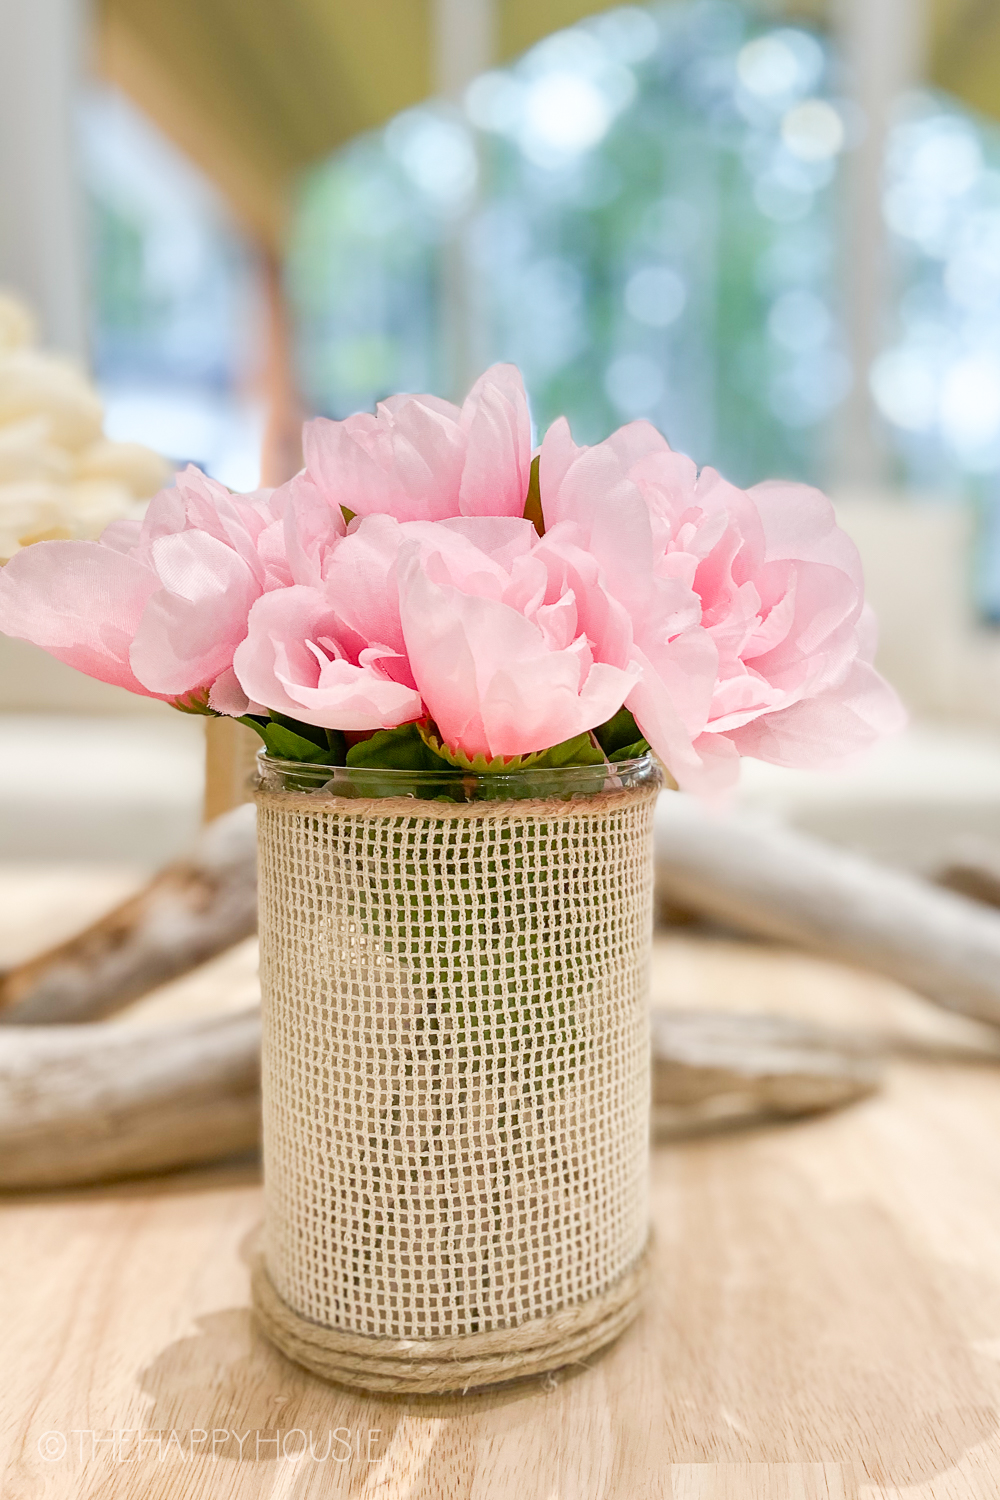 The pink peonies in the vase.